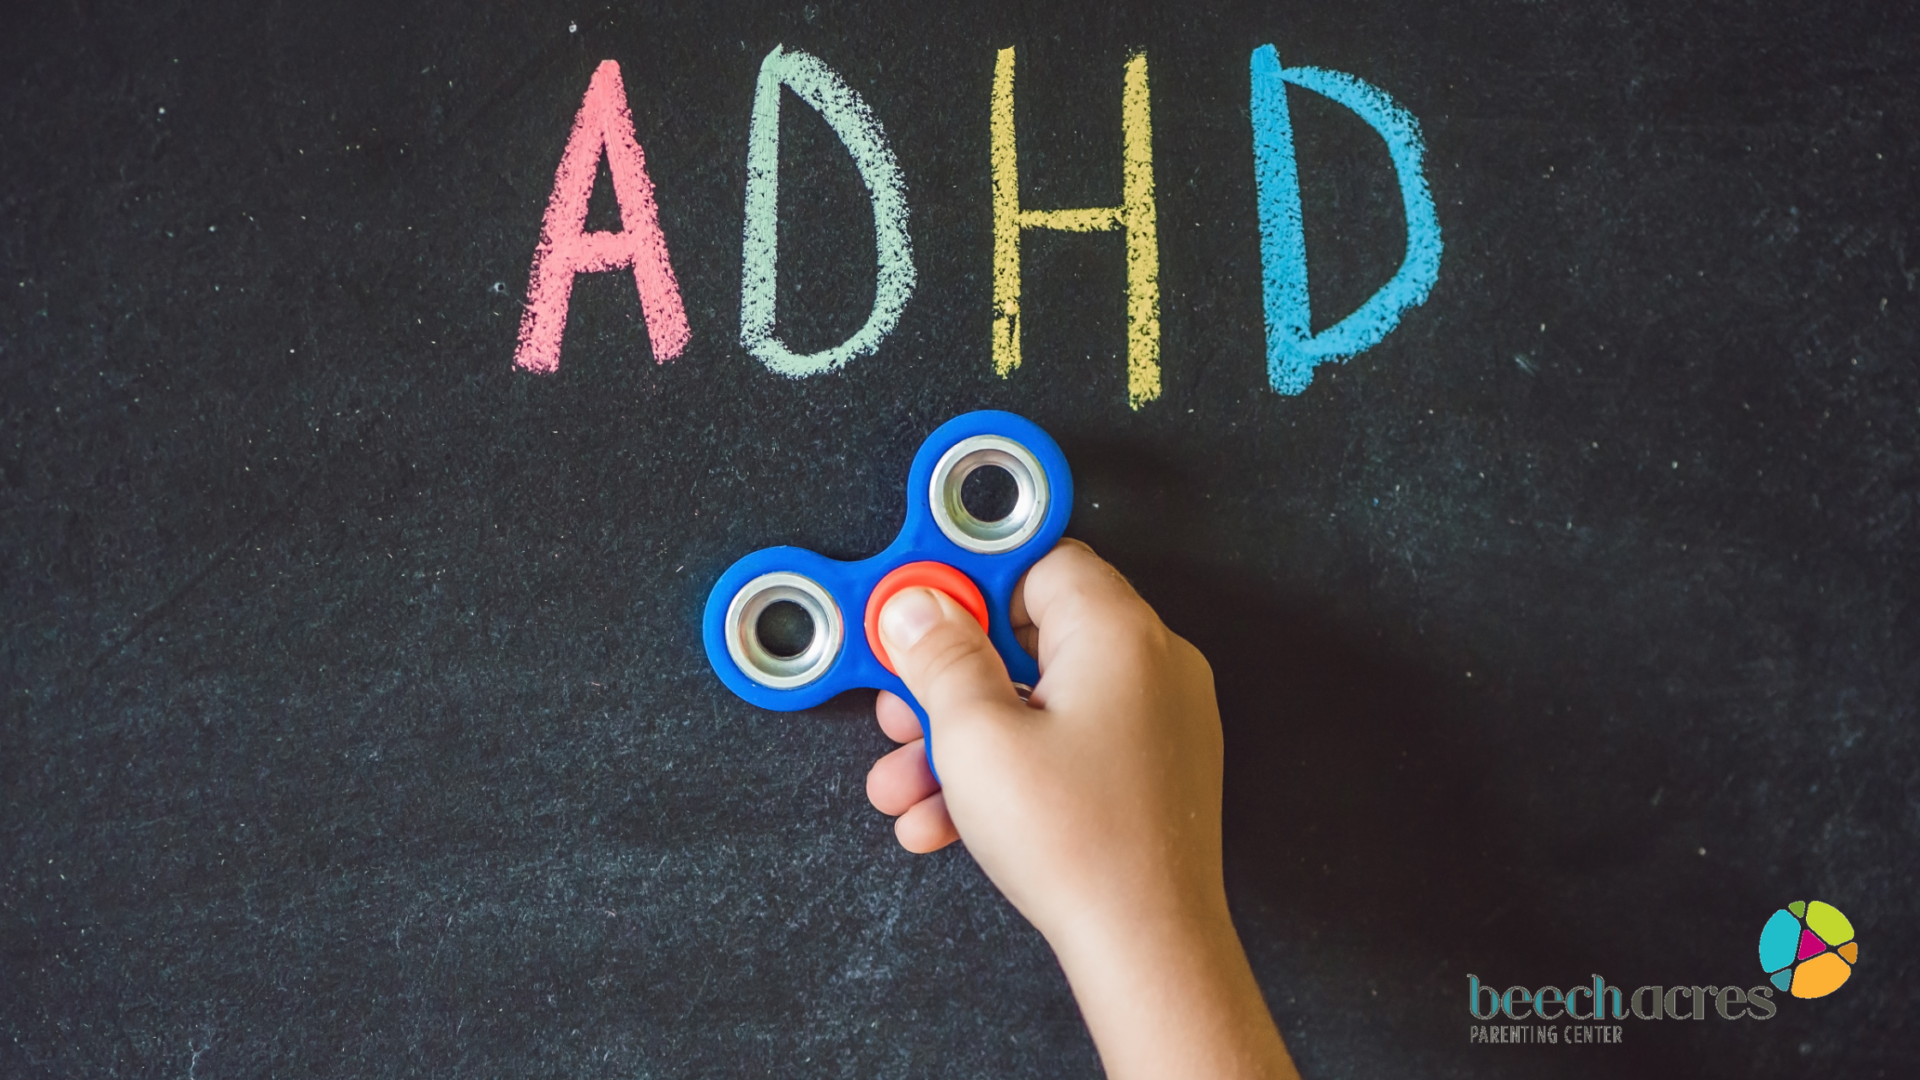 Clearing Up Myths and Misconceptions about ADHD